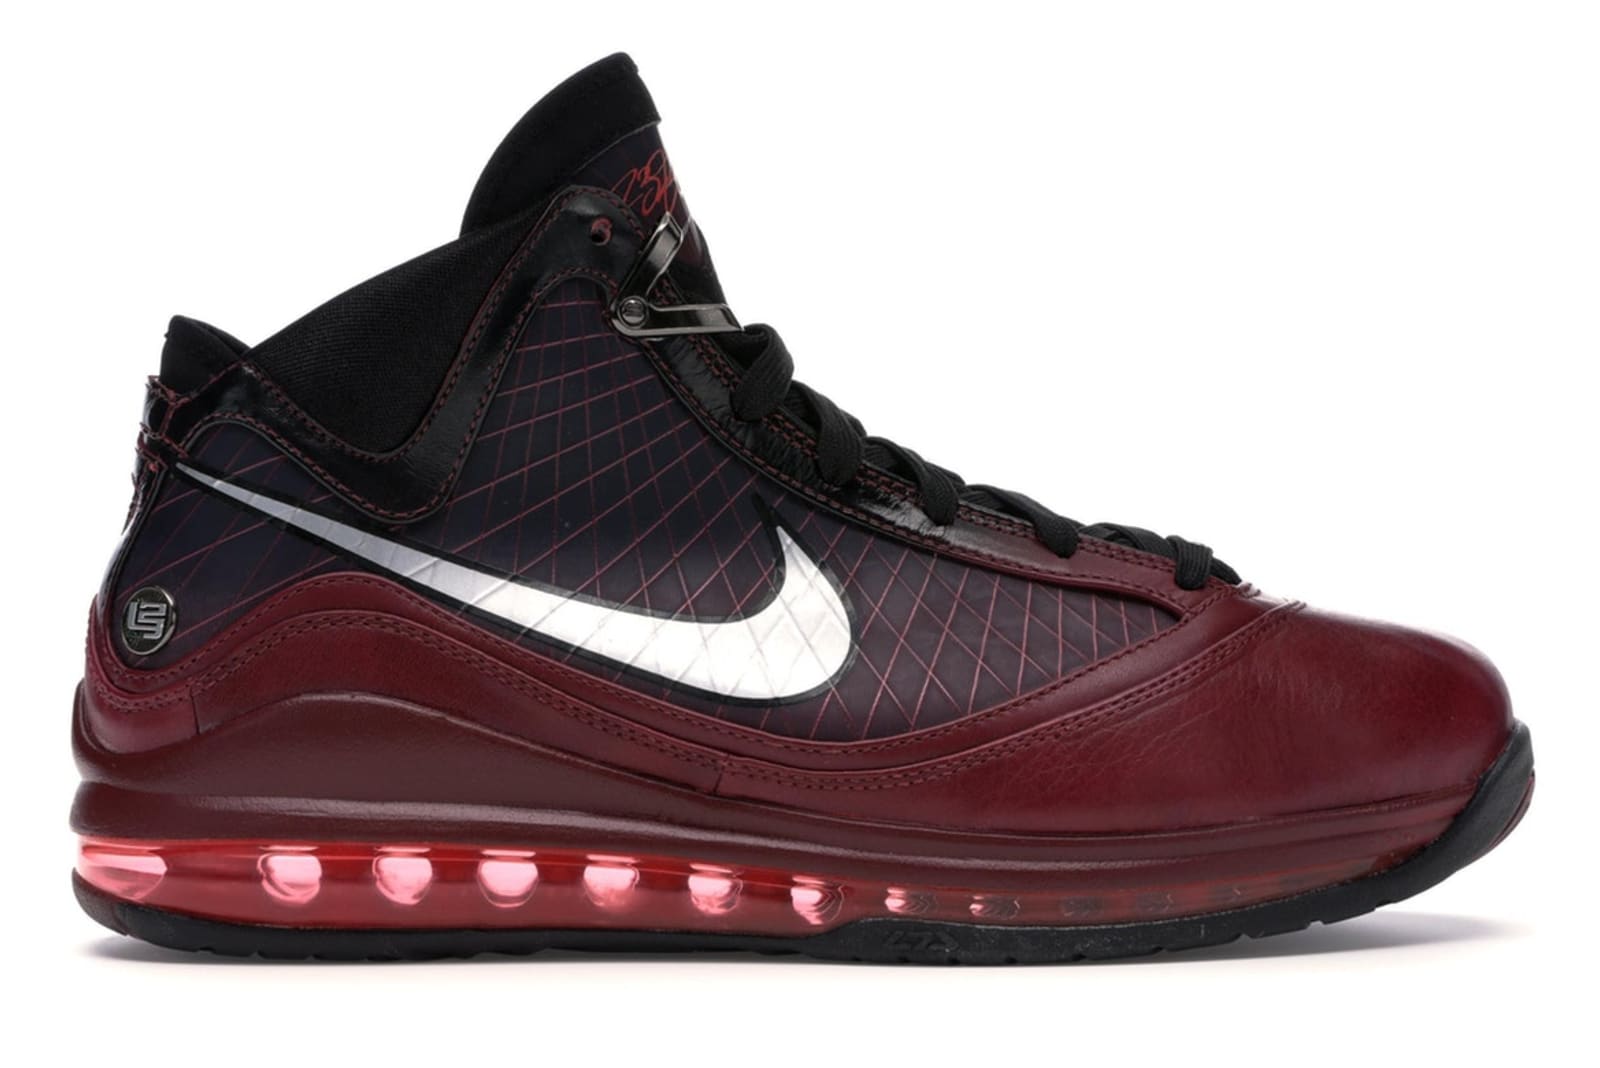 Nike LeBron 7 &quot;Christmas&quot; Rumored Release Date Revealed: Details